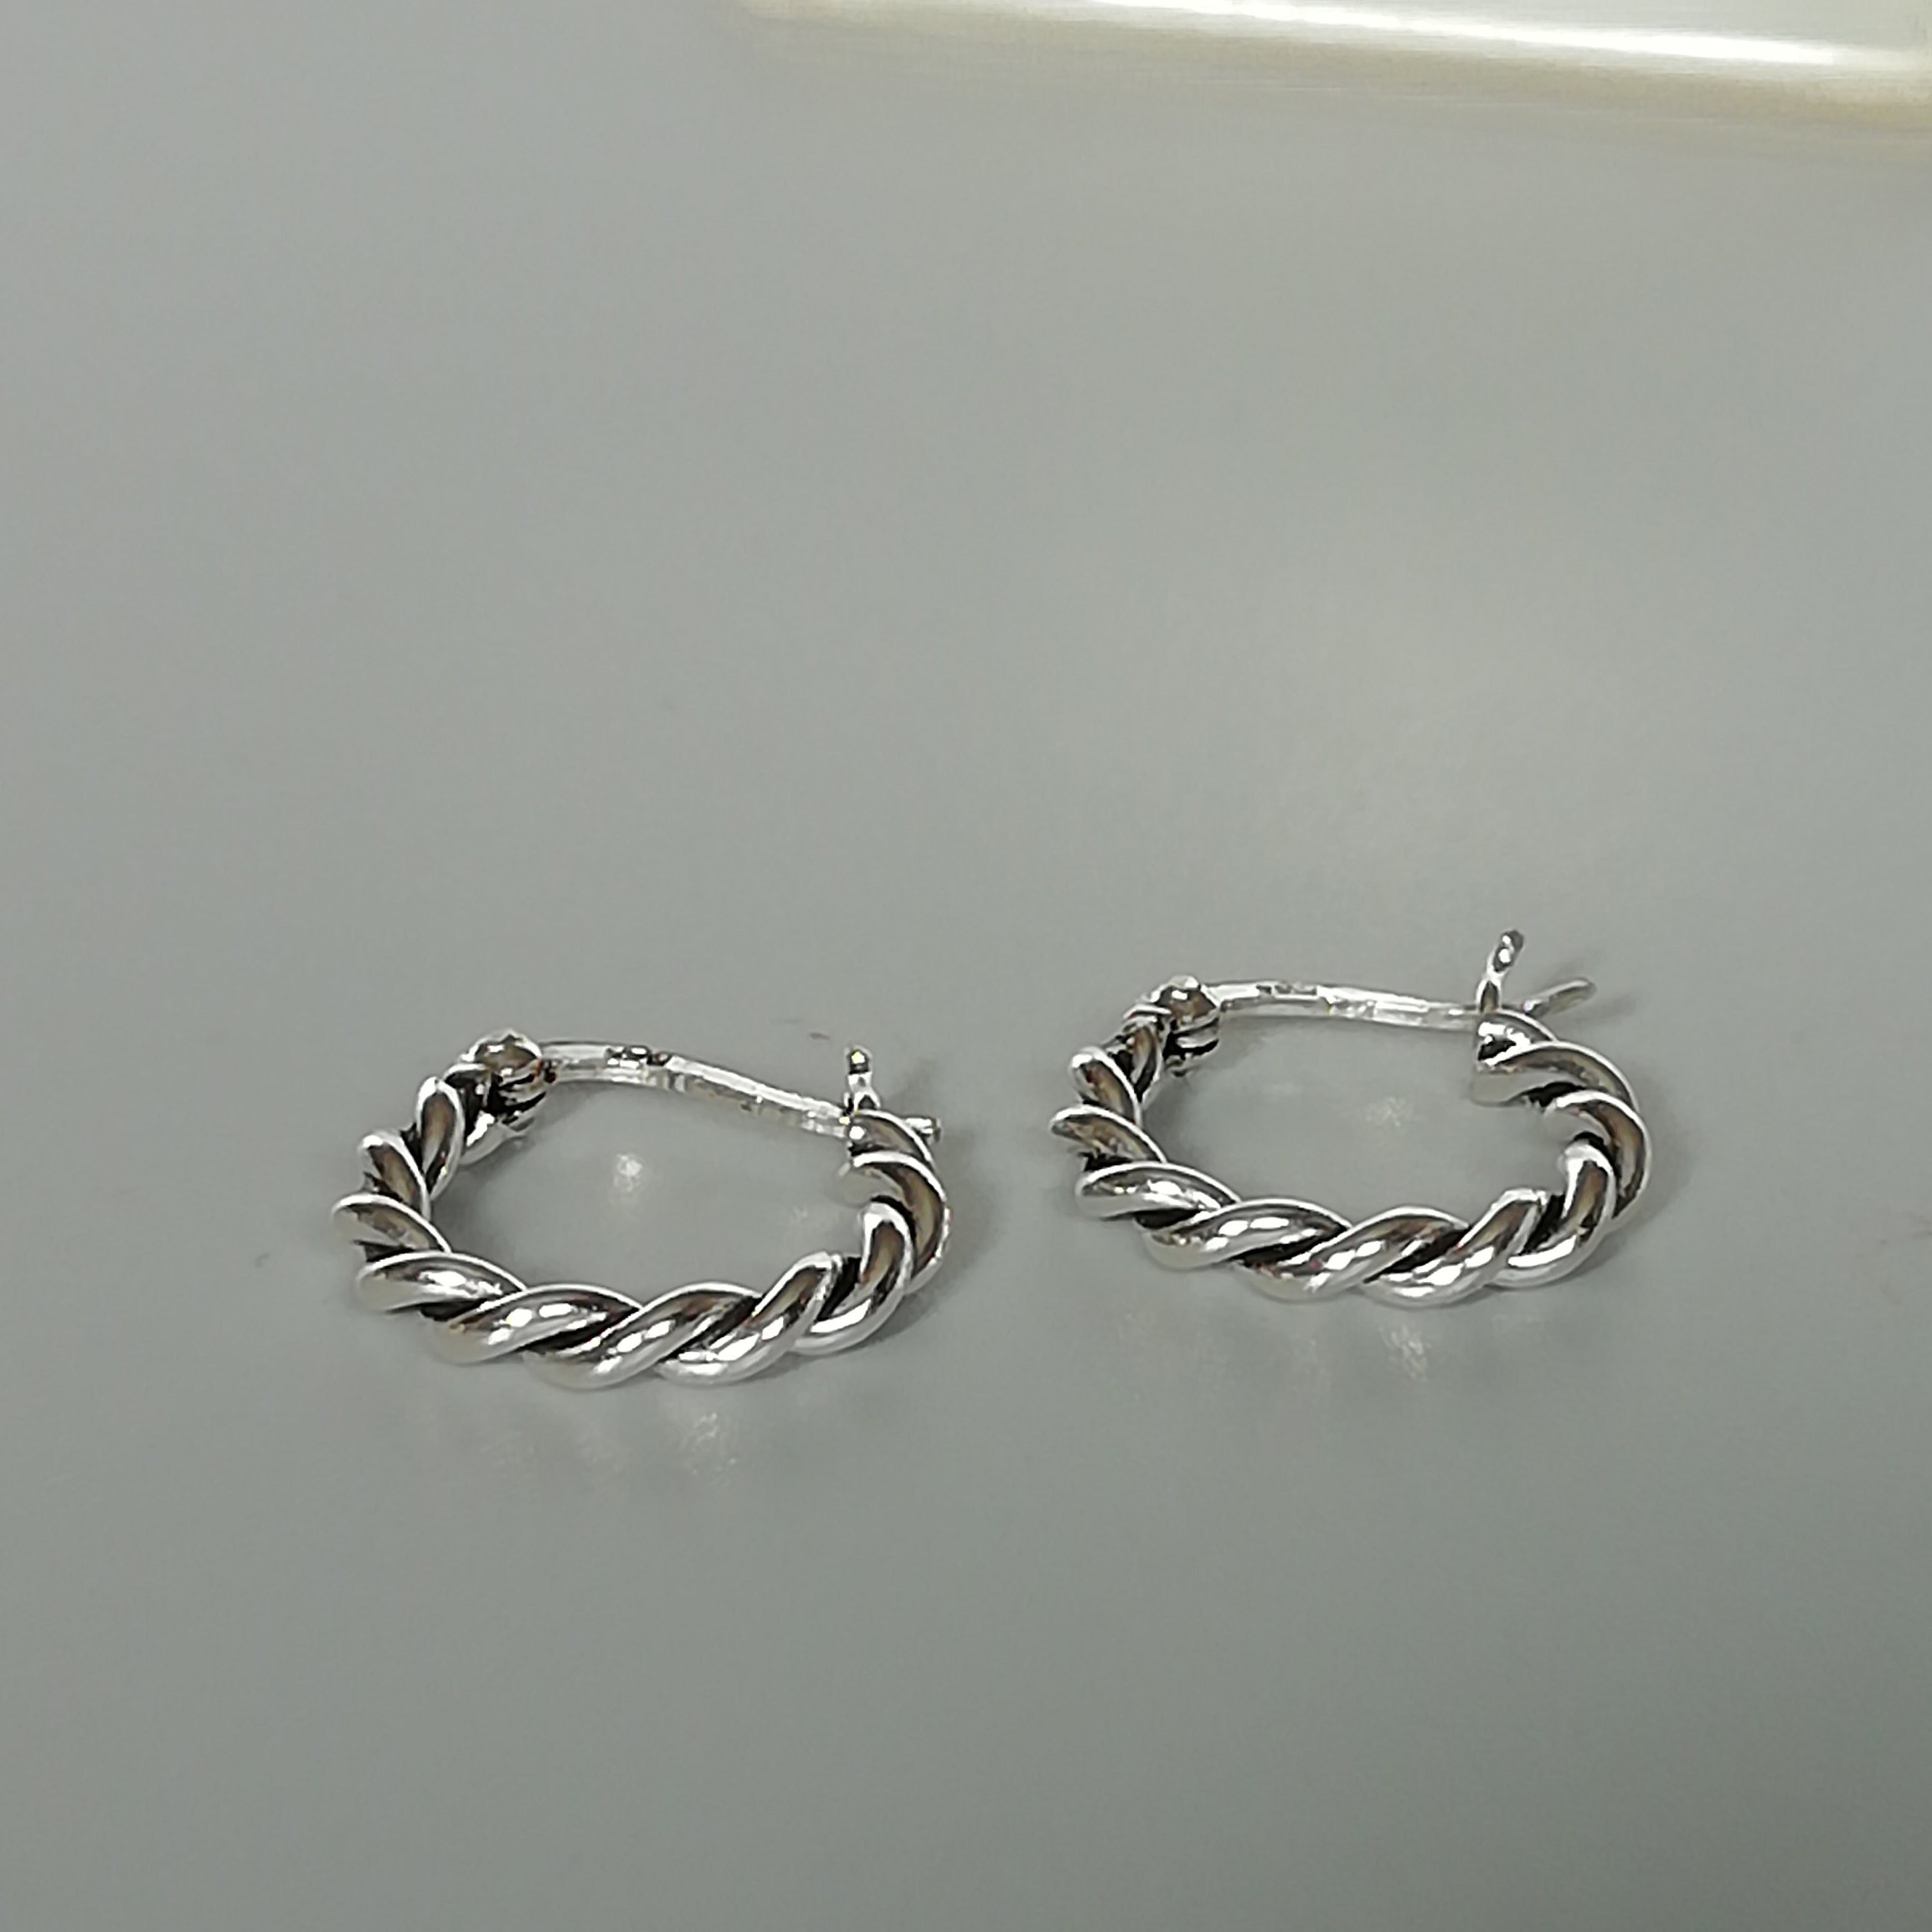 Twisted silver hoops 17mm silver hoops Silver jewelry | Etsy